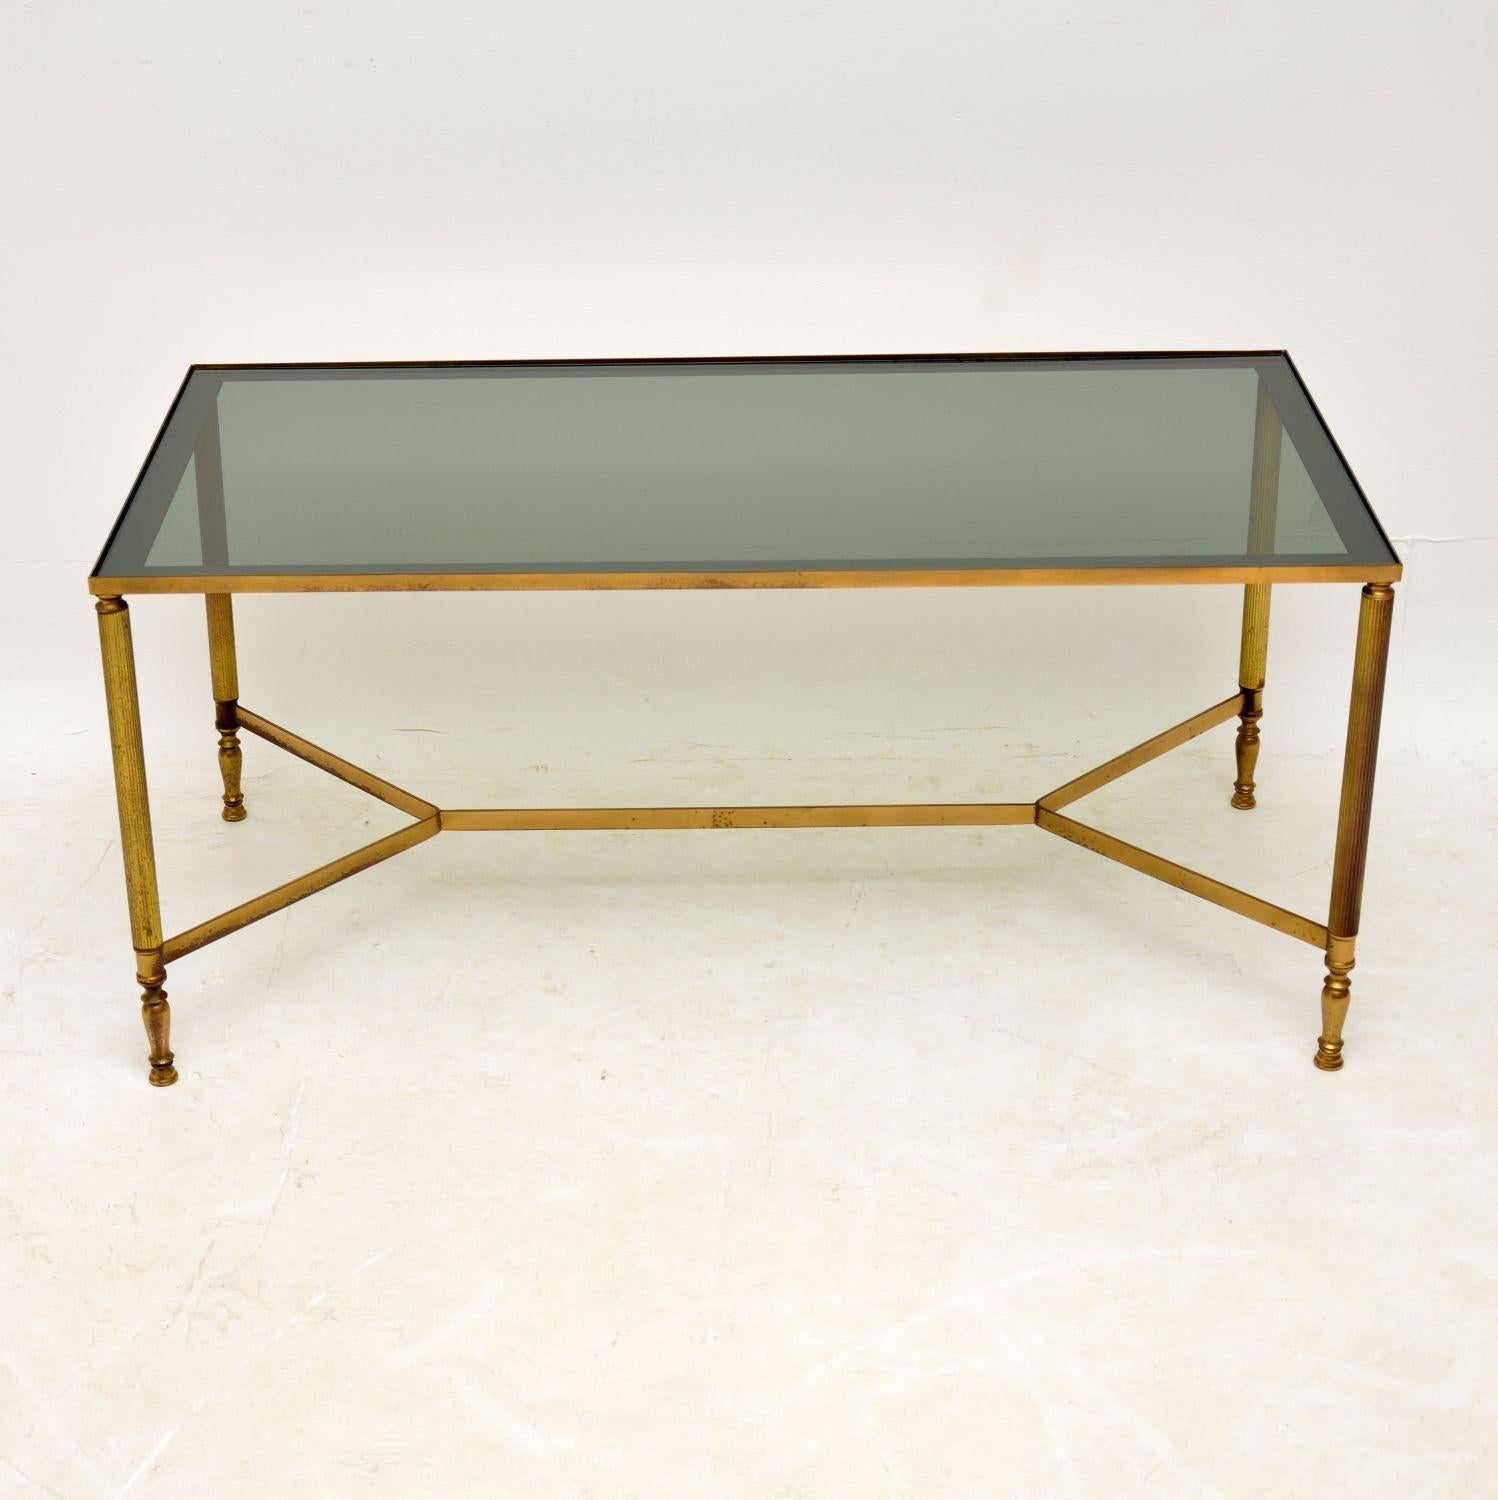 A smart and elegant vintage French coffee table in brass and glass, this dates from the 1950s-1960s. It has just the right amount of wear, with a beautiful patina, this table is sturdy and sound. The glass has some minor surface wear, as expected